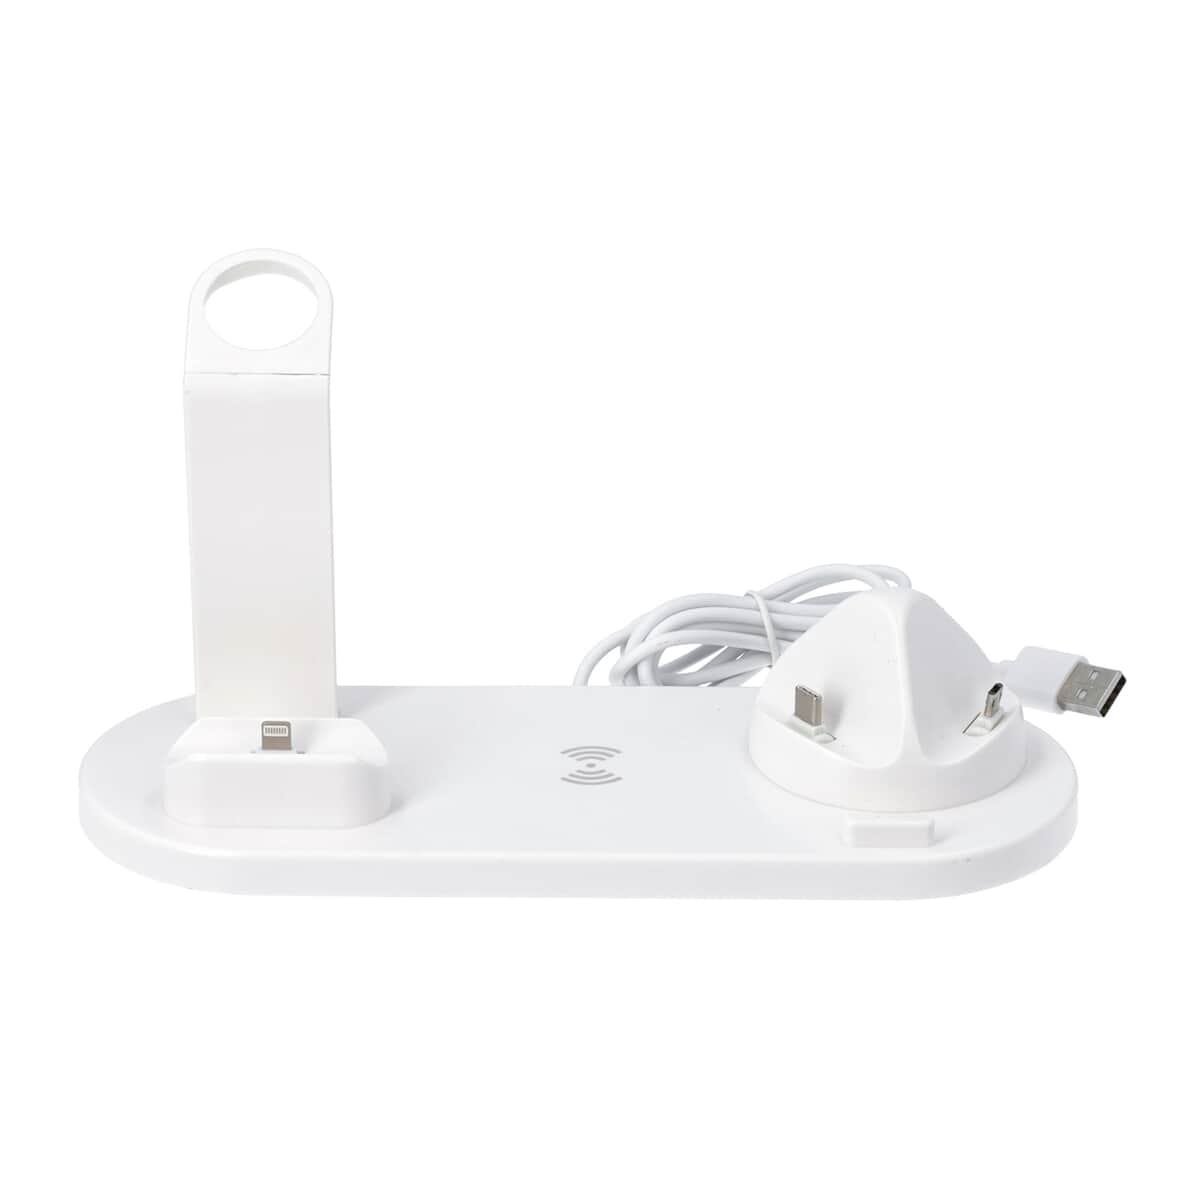 4 in 1 Wireless Charging Station for iPhone, Watch, AirPods & Android phones - White image number 0